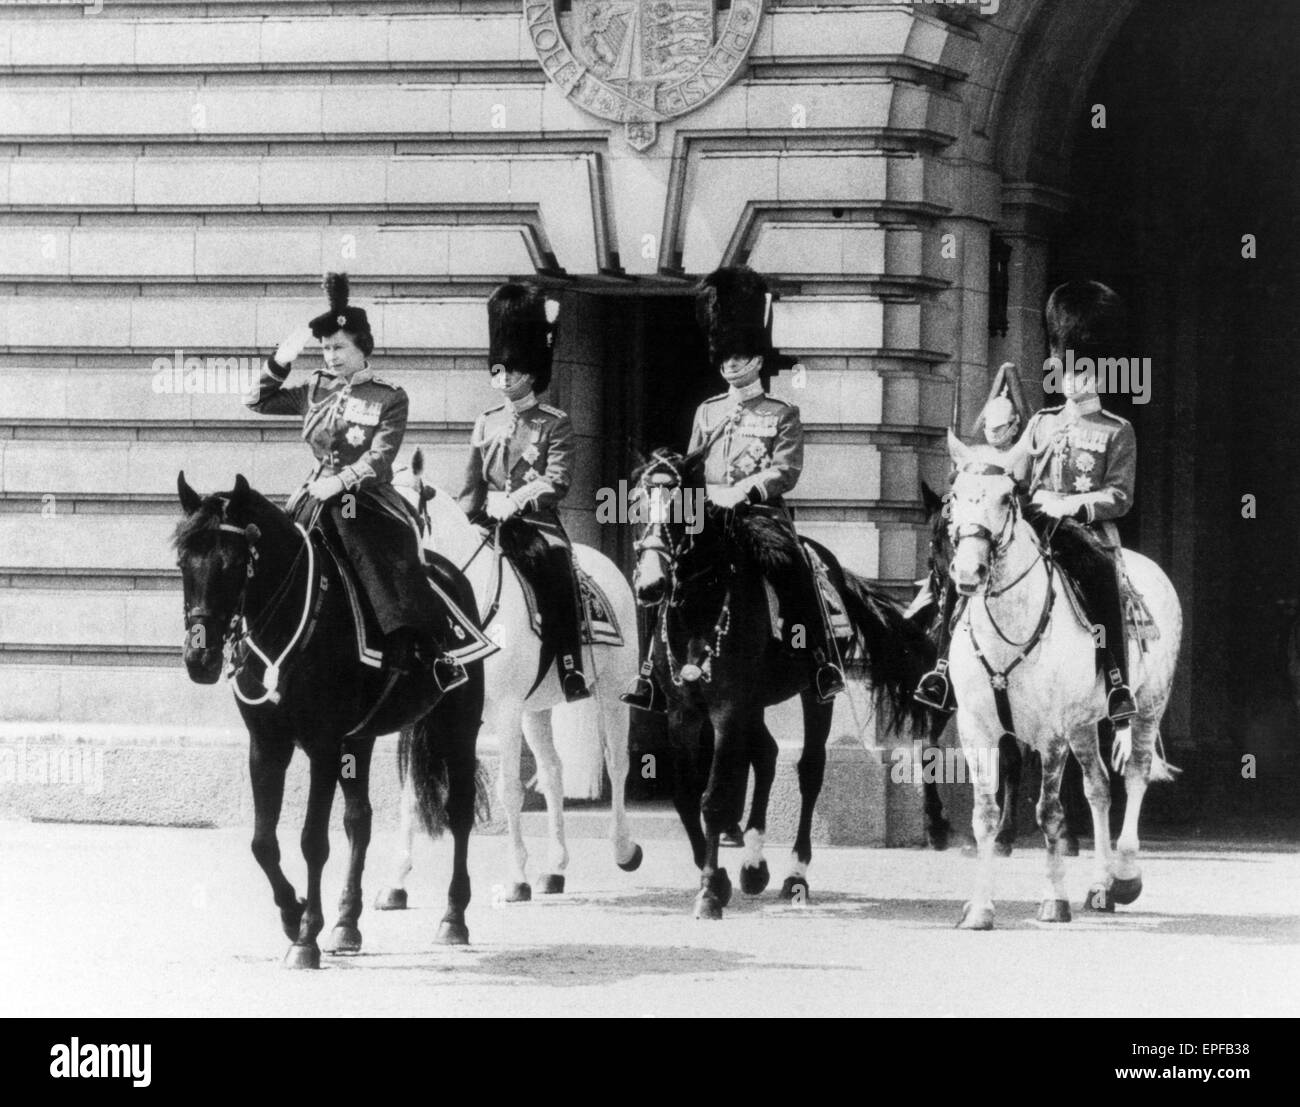 The Queen takes part in Trooping of the Colour ceremony with 2nd Battalion Coldstream Guards, Horse Guards Parade,, London, Saturday 12th June 1976. Stock Photo